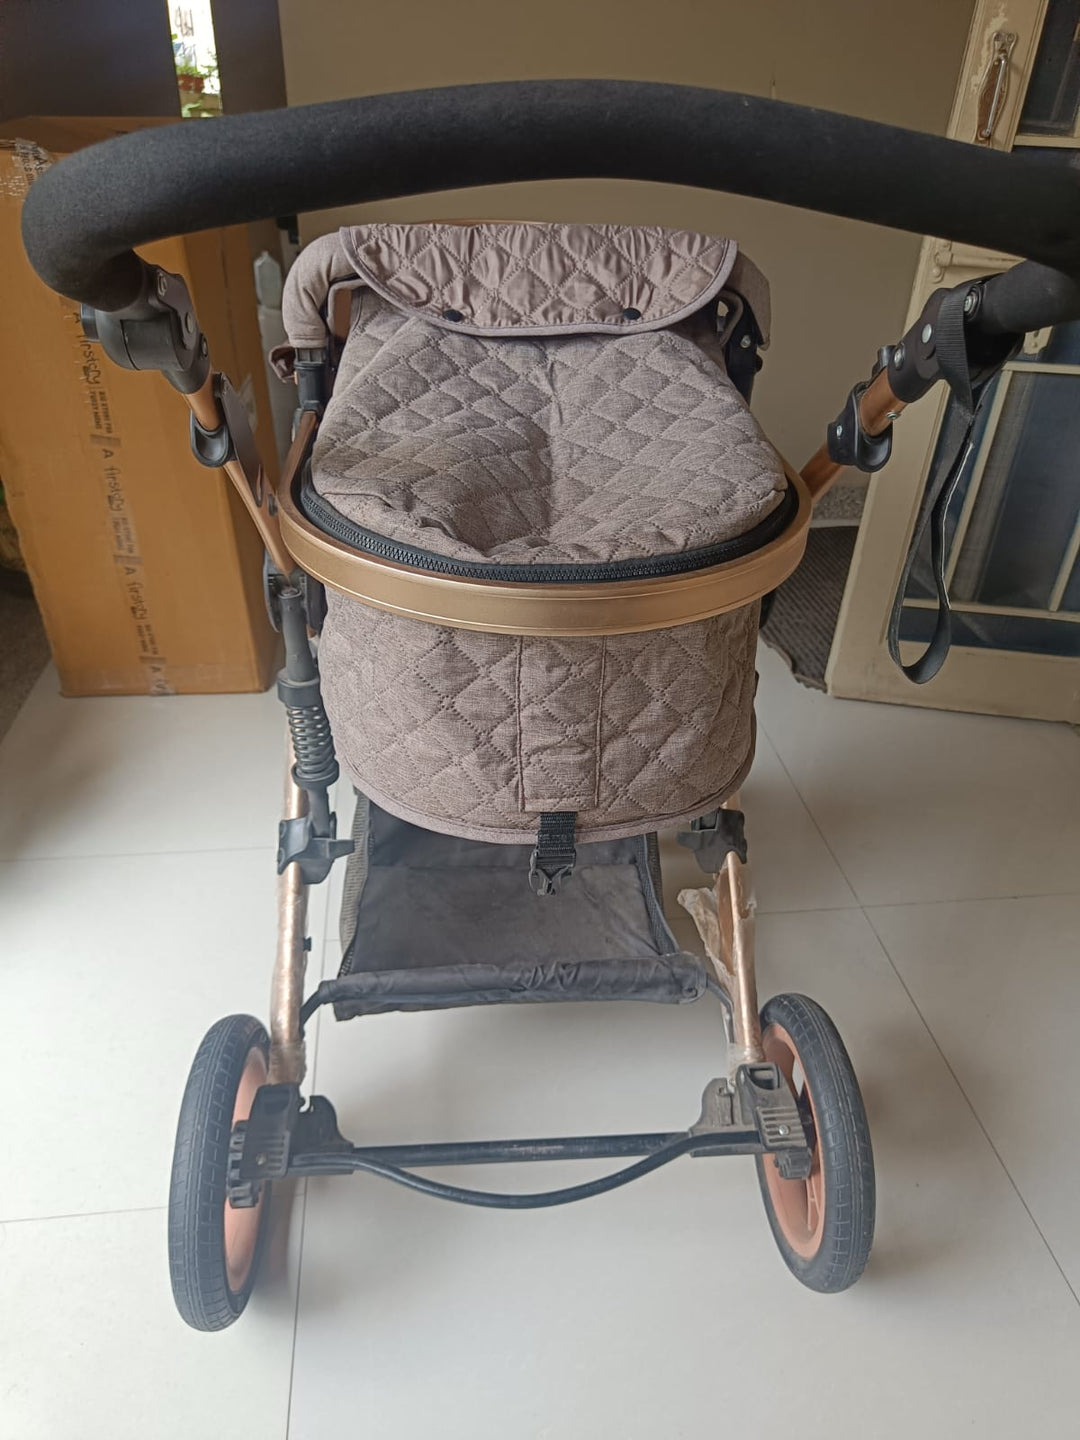 Babyhug Majestic Stroller Cum Carry Cot With Canopy